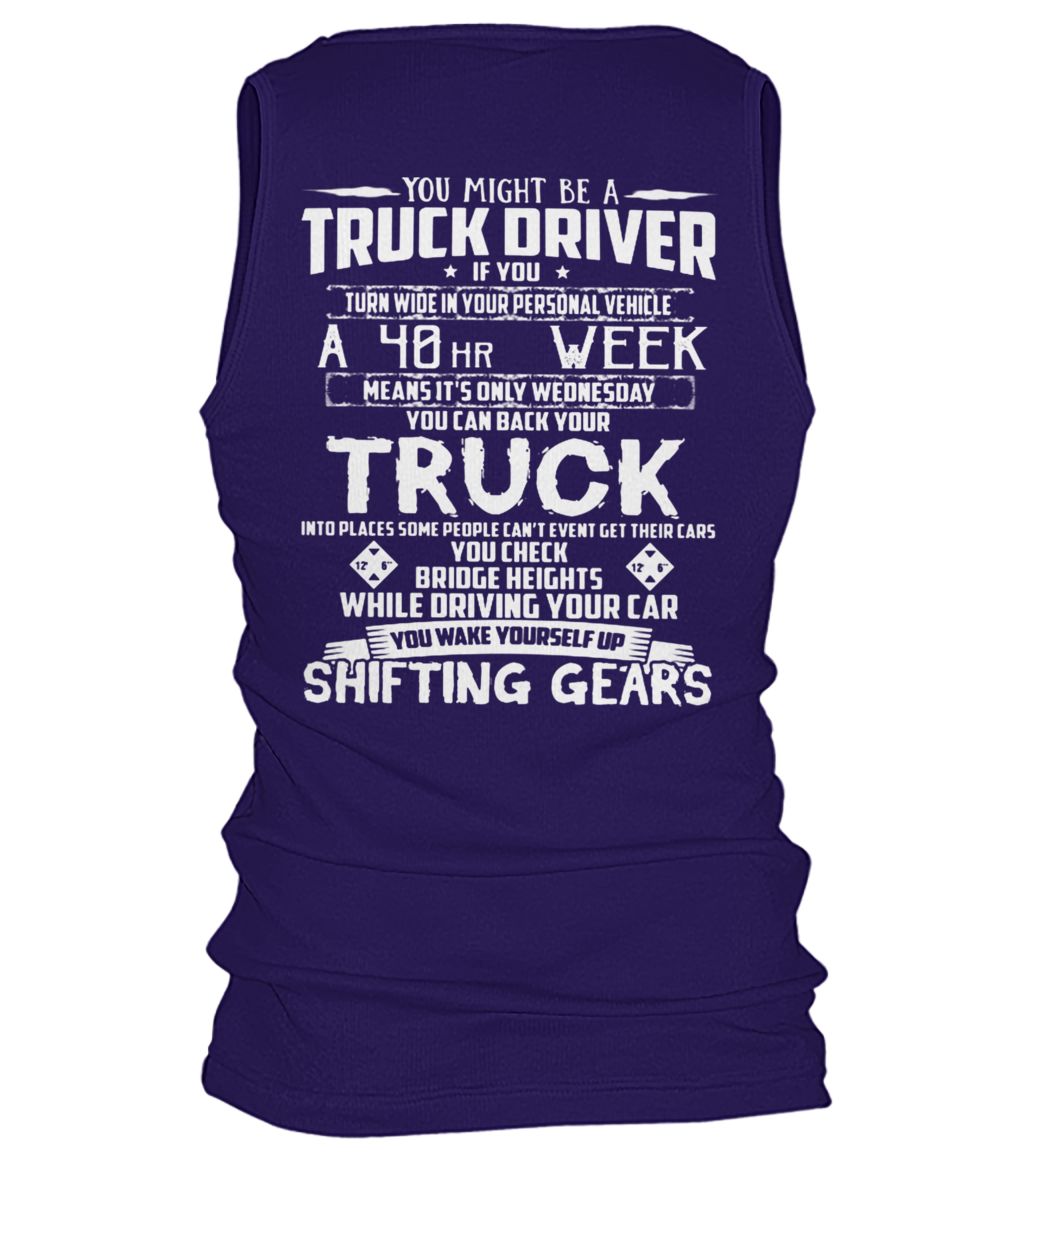 You might be a truck driver if you turn wide in your personal vehicle a 40hr week men's tank top